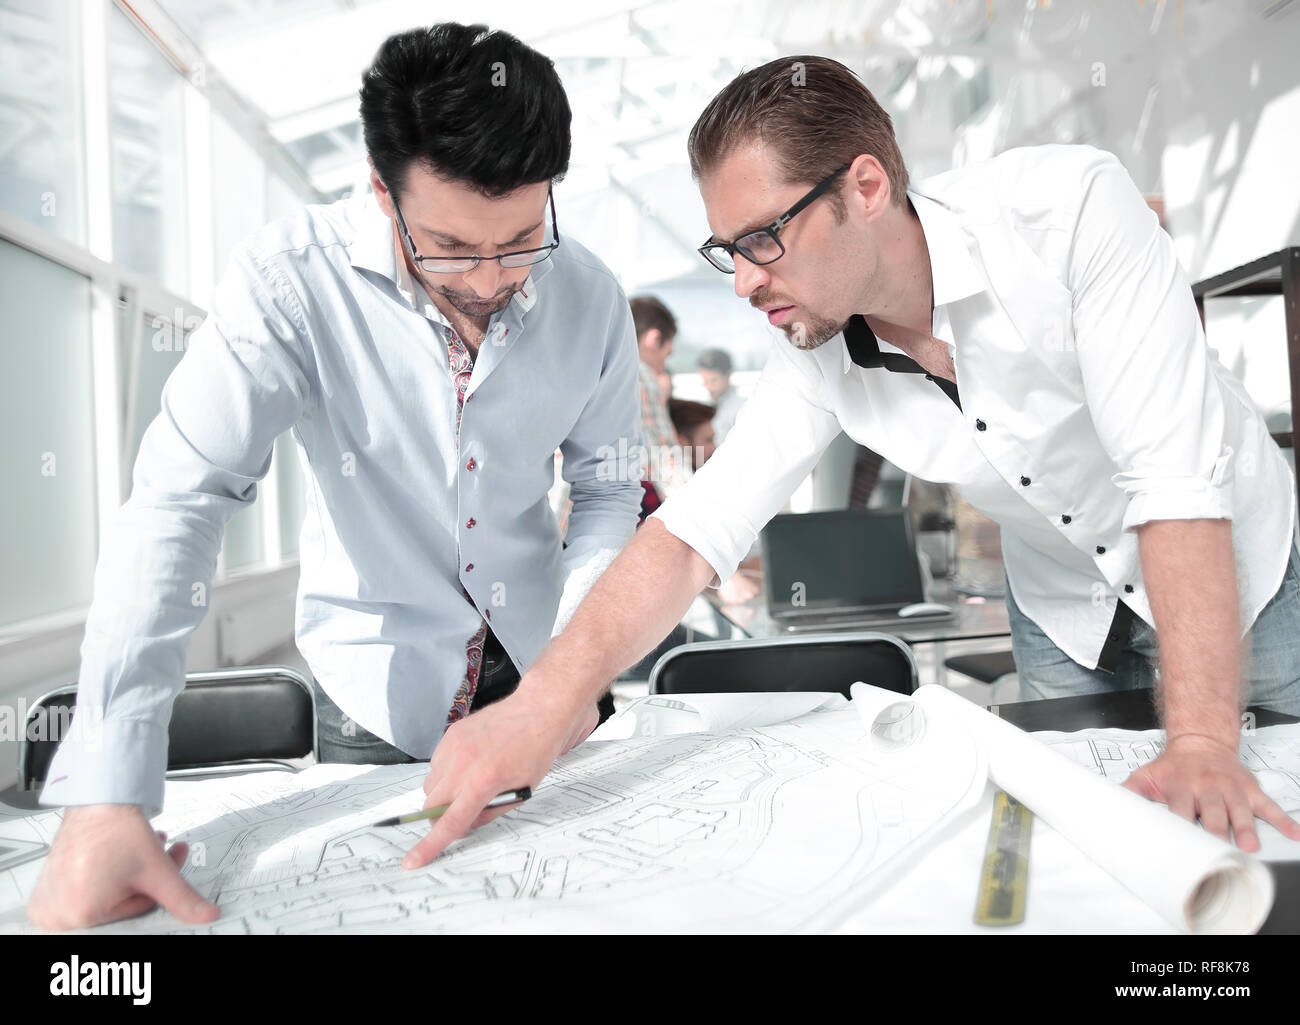 close up.professional designers standing at the workplace Stock Photo